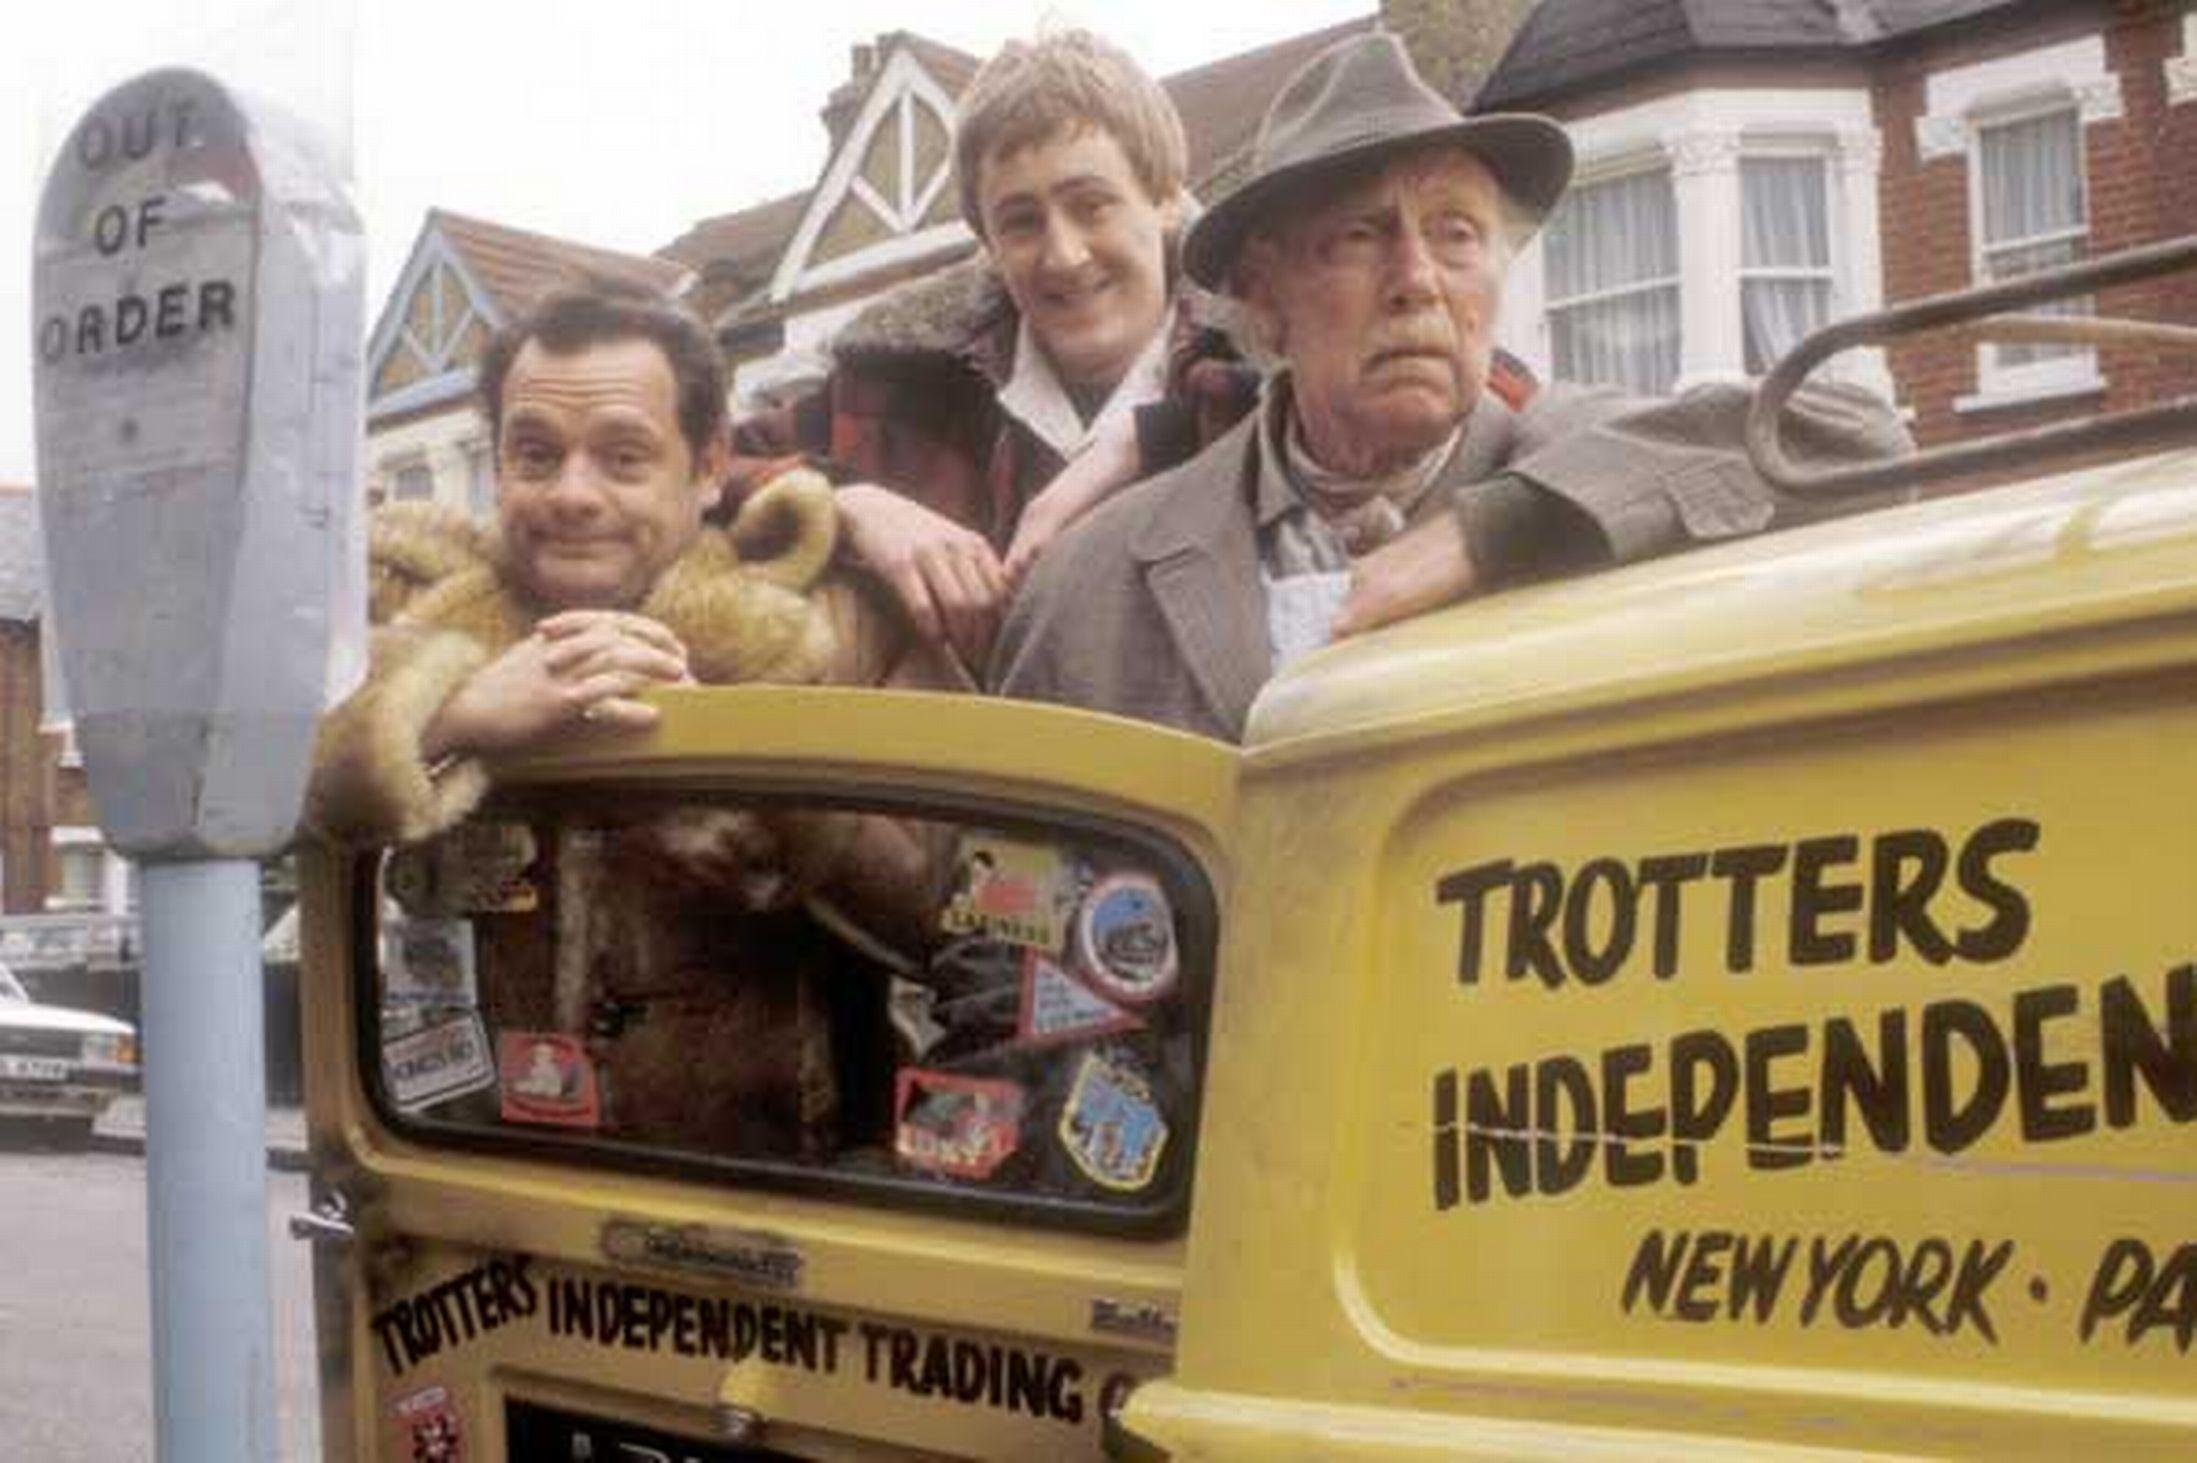 Only Fools and Horses Theme Song. Movie Theme Songs & TV Soundtracks